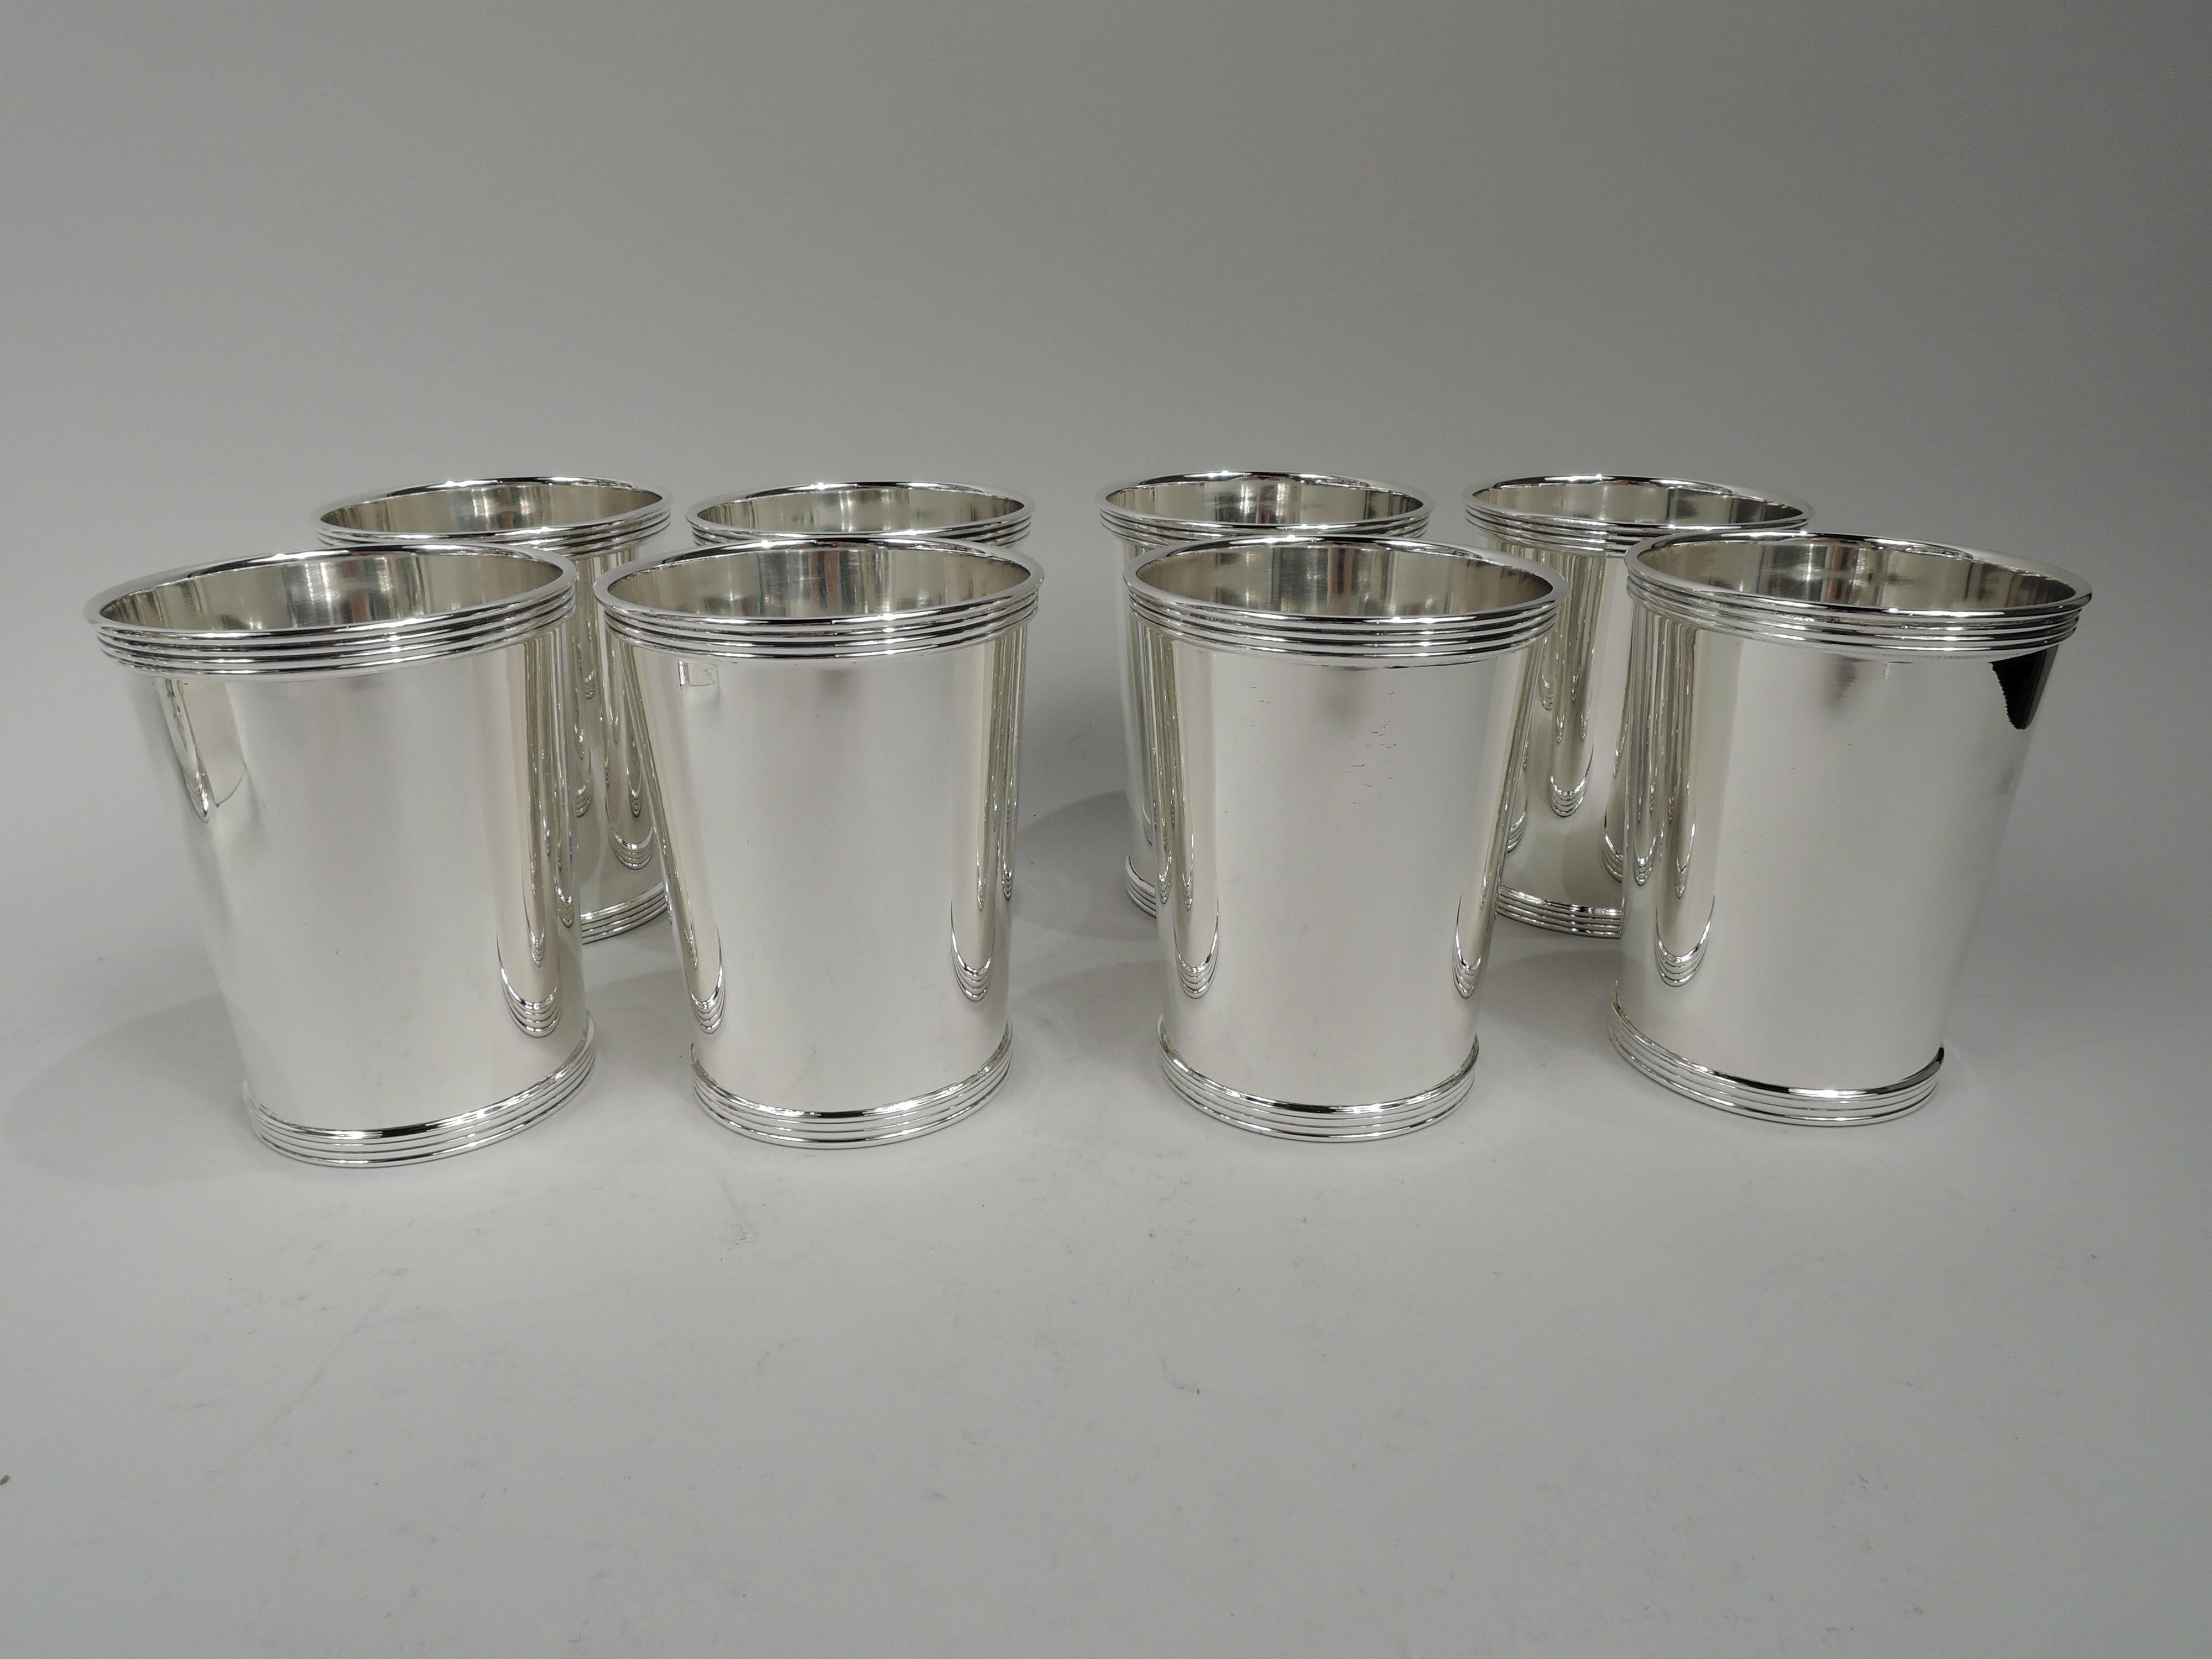 Set of 8 sterling silver mint julep cups. Made by International in Meriden, Conn. Each: Straight and tapering sides, and reeded rim and foot. Fully marked including maker’s stamp and no. P699. Total weight: 31 troy ounces.